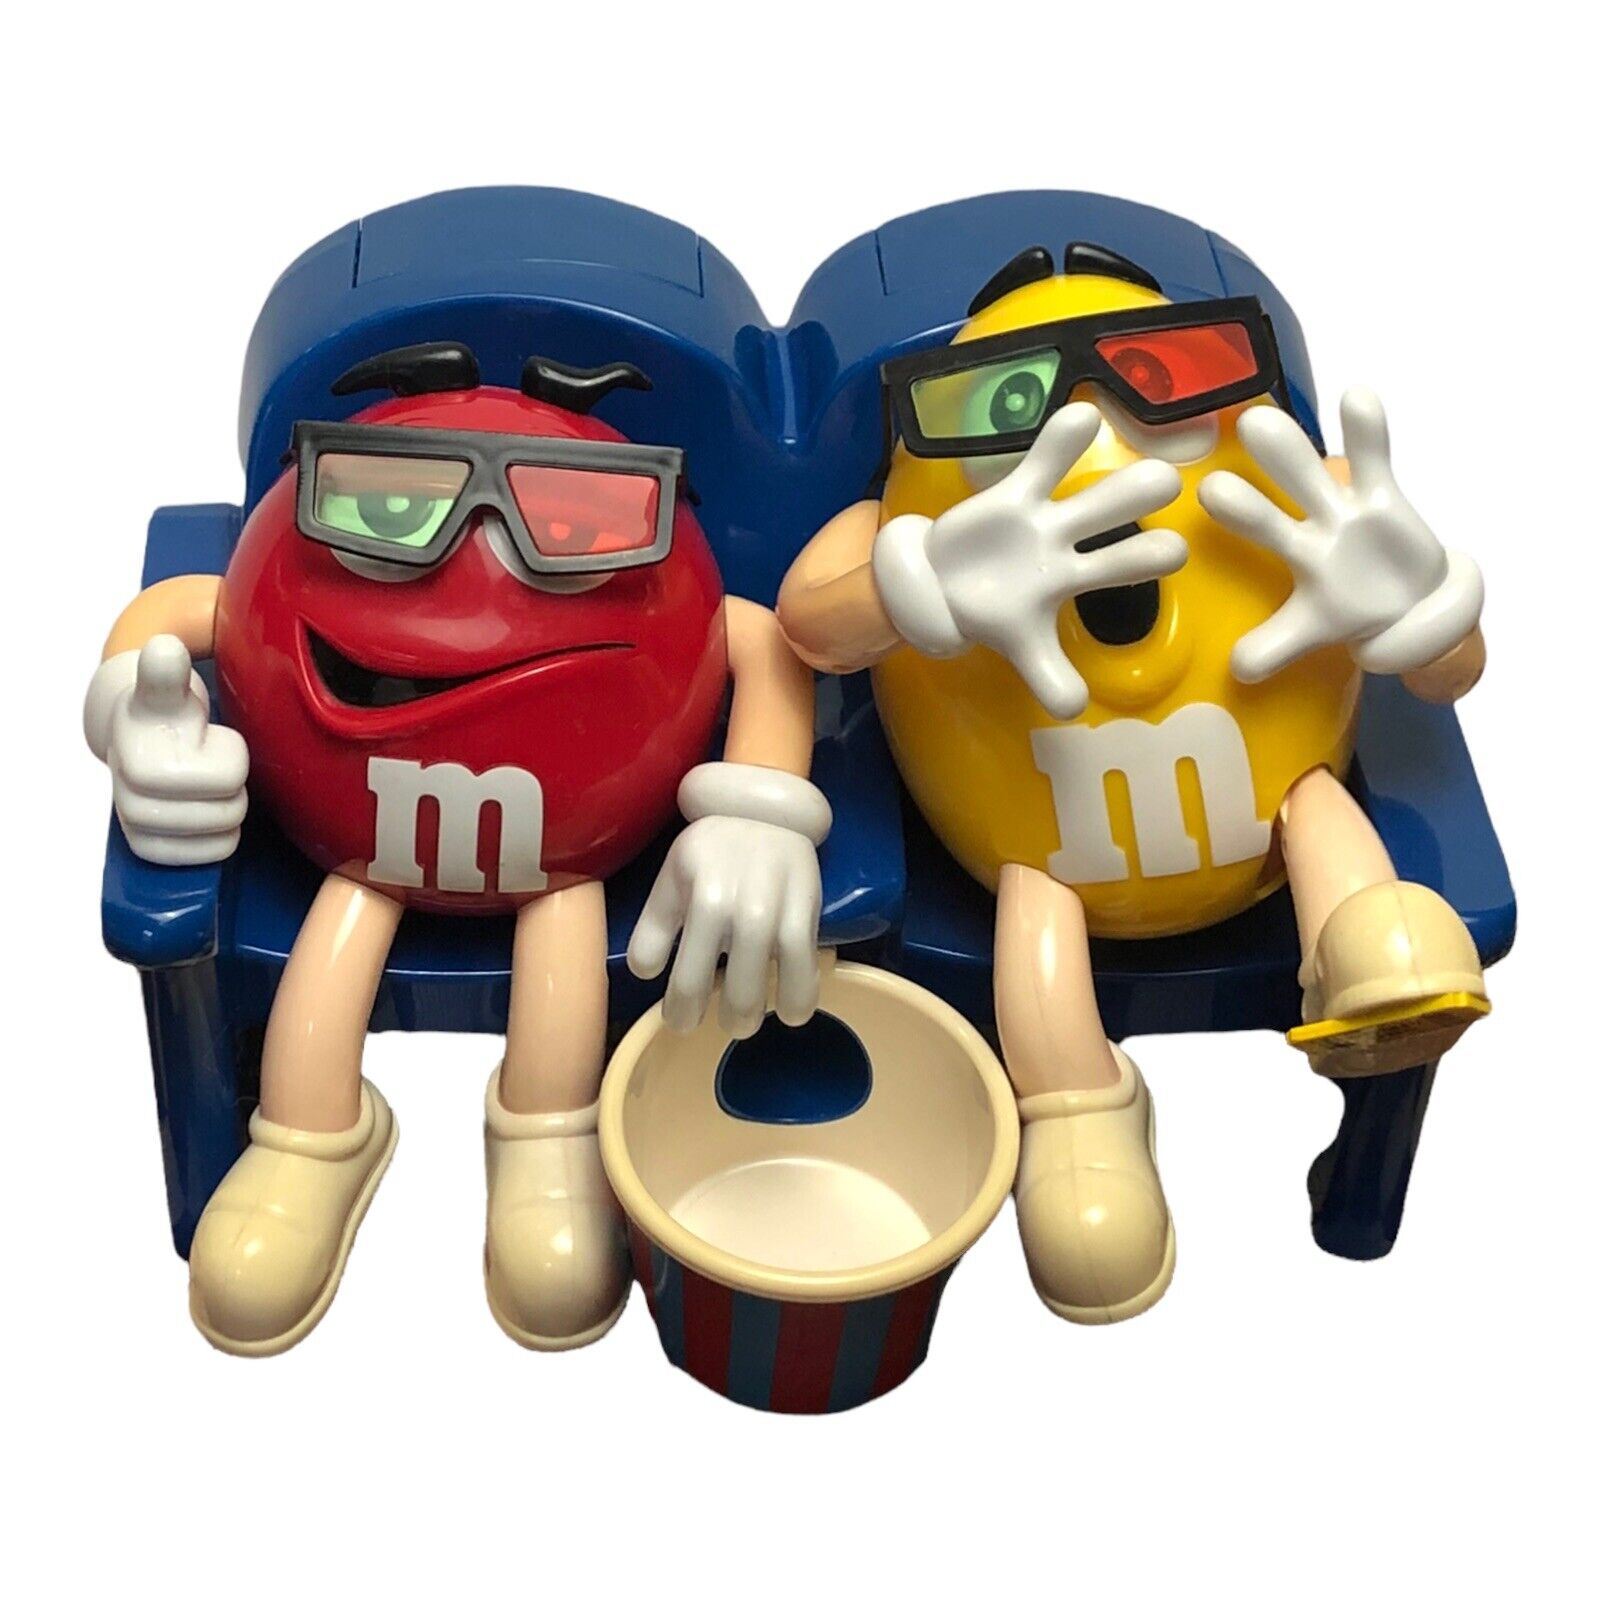 M&M’s Movie Theater 3D Glasses Popcorn Bowl Candy Dispenser Red Yellow By Mars